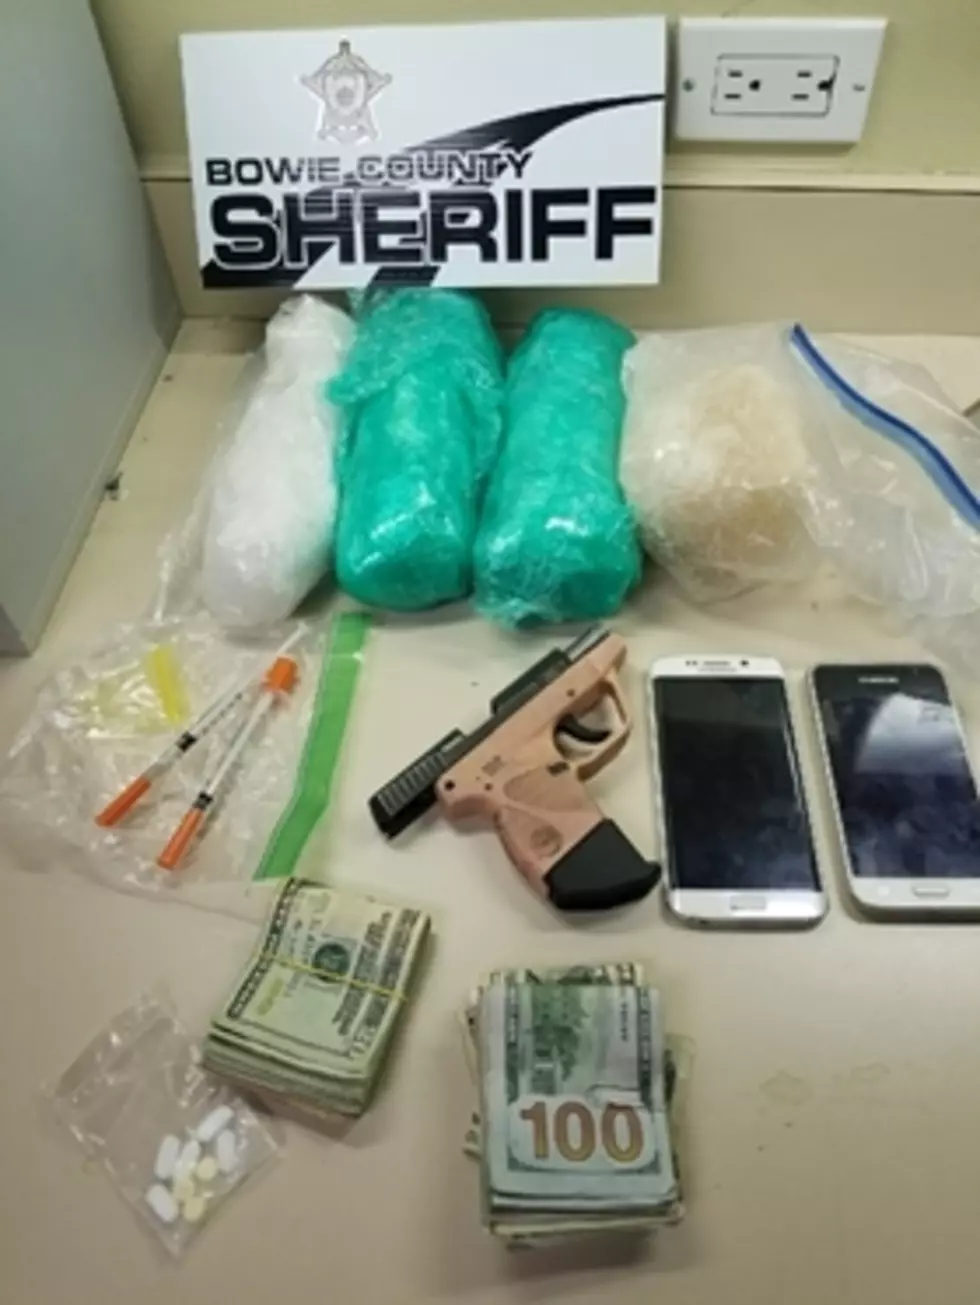 Bowie County Makes Drug Haul & Two Arrest During Traffic Stop